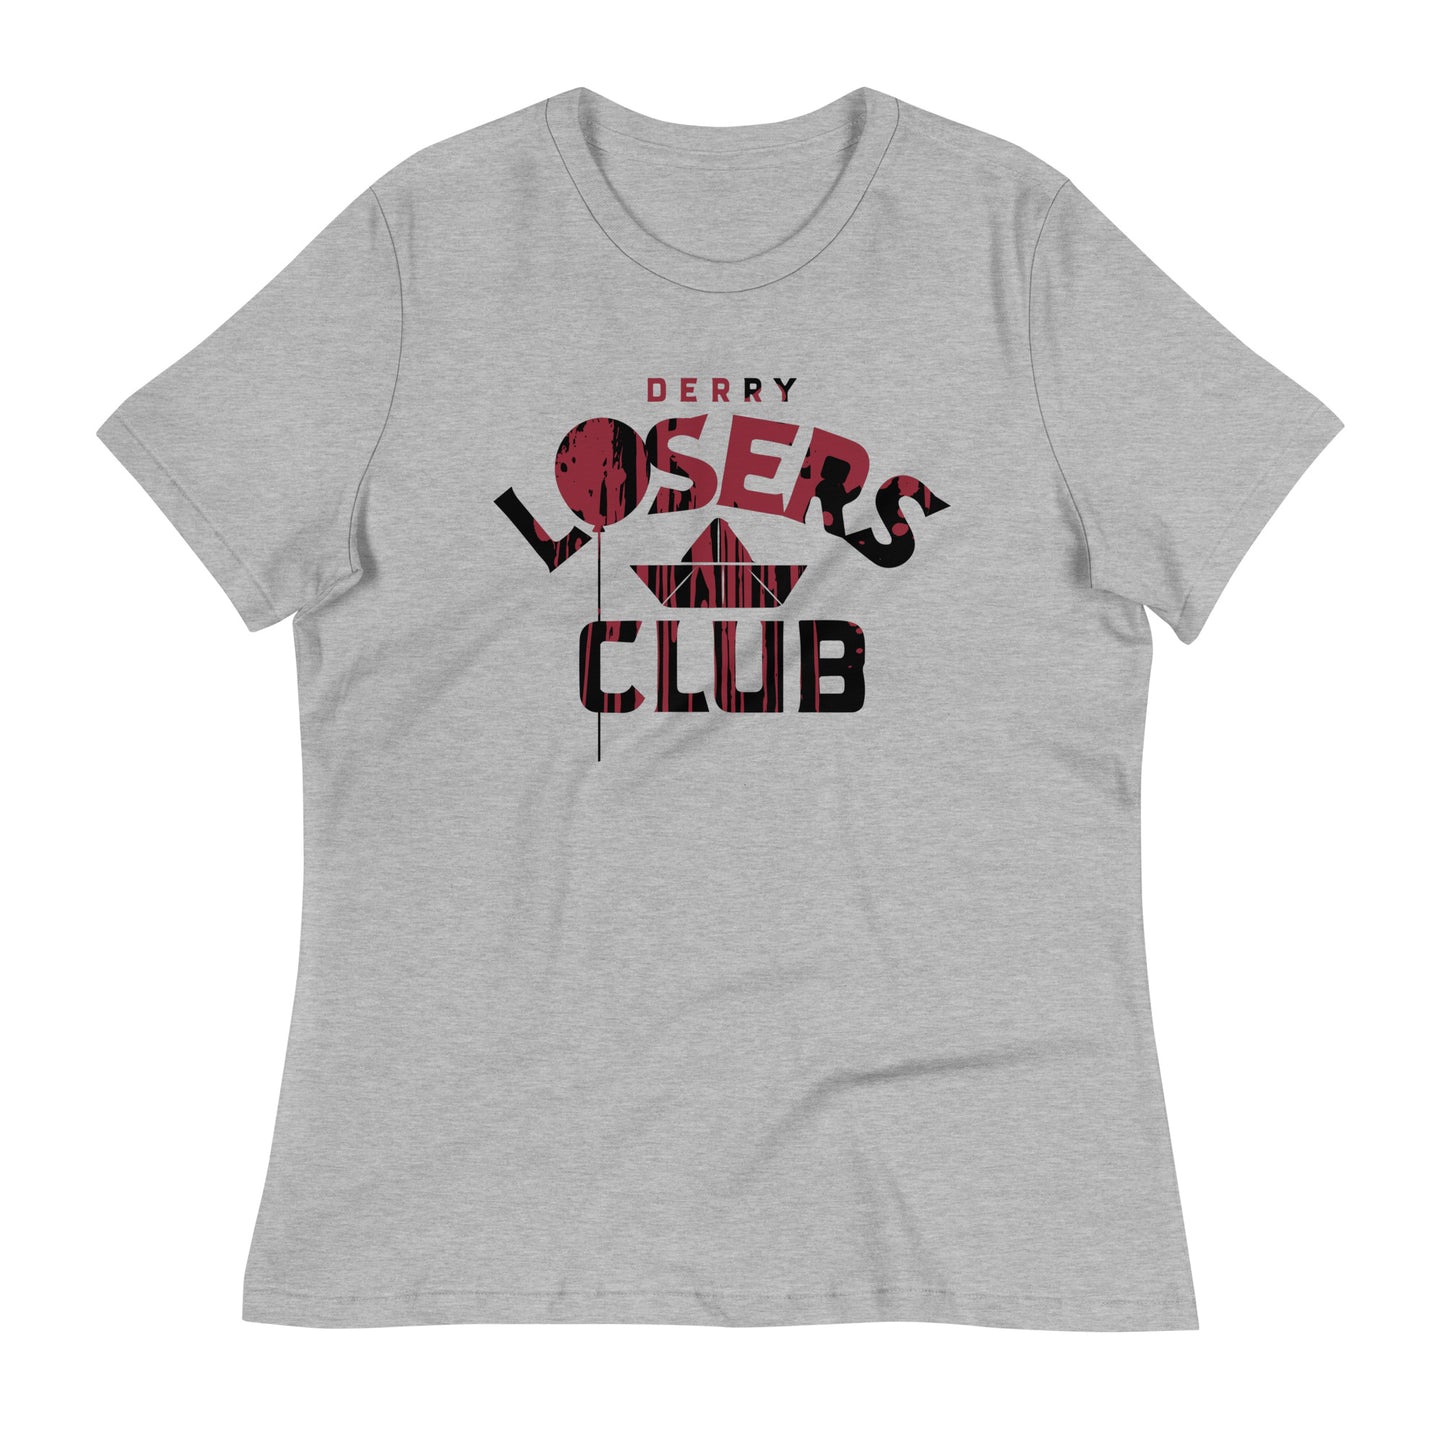 Derry Losers Club Women's Signature Tee